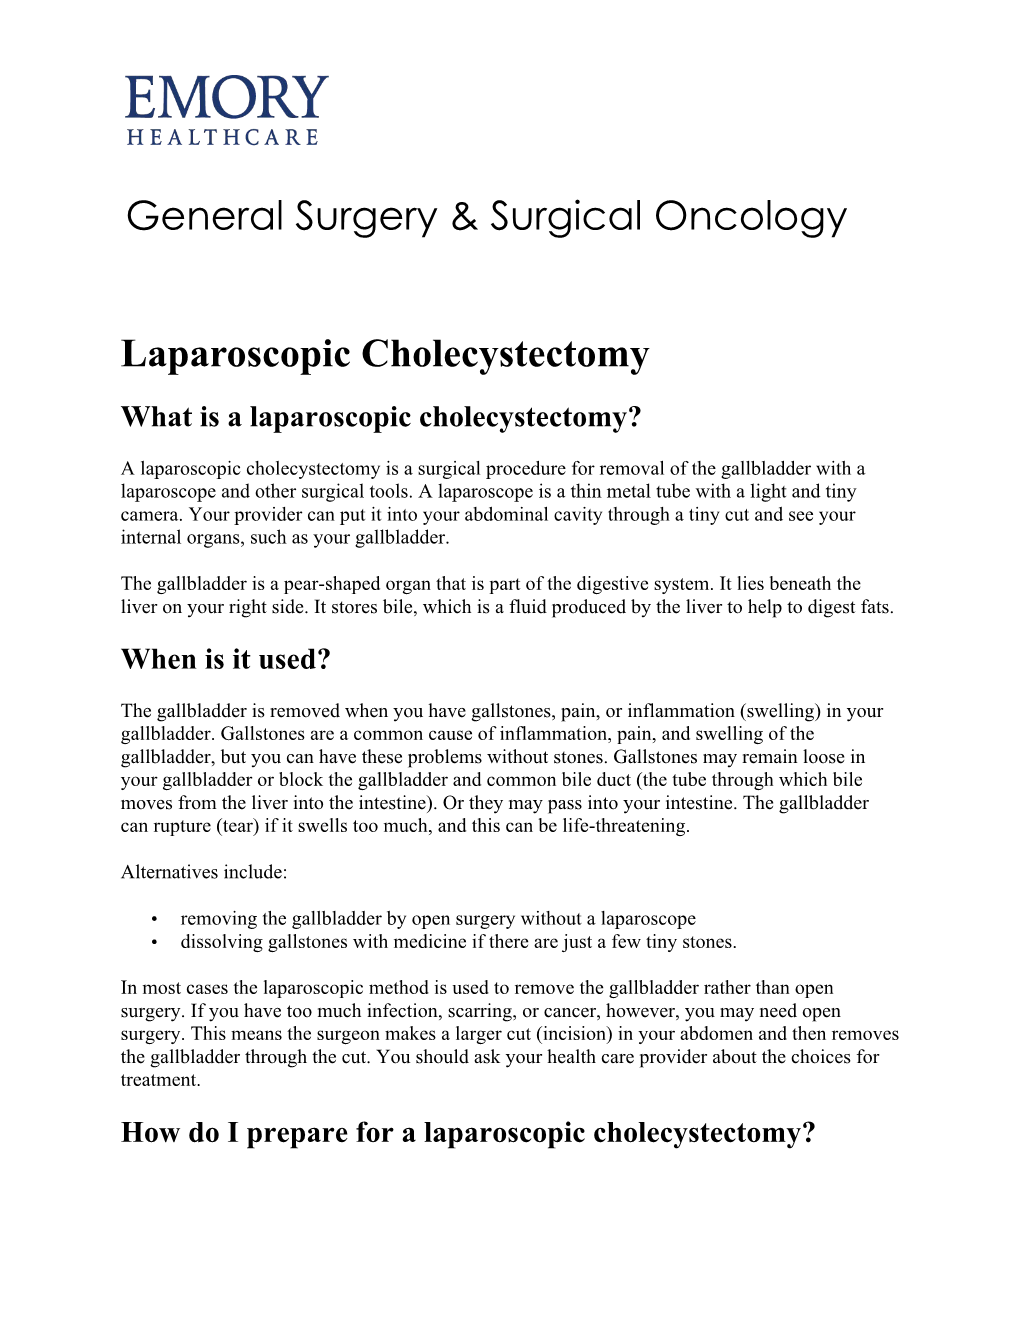 Laparoscopic Cholecystectomy General Surgery & Surgical Oncology